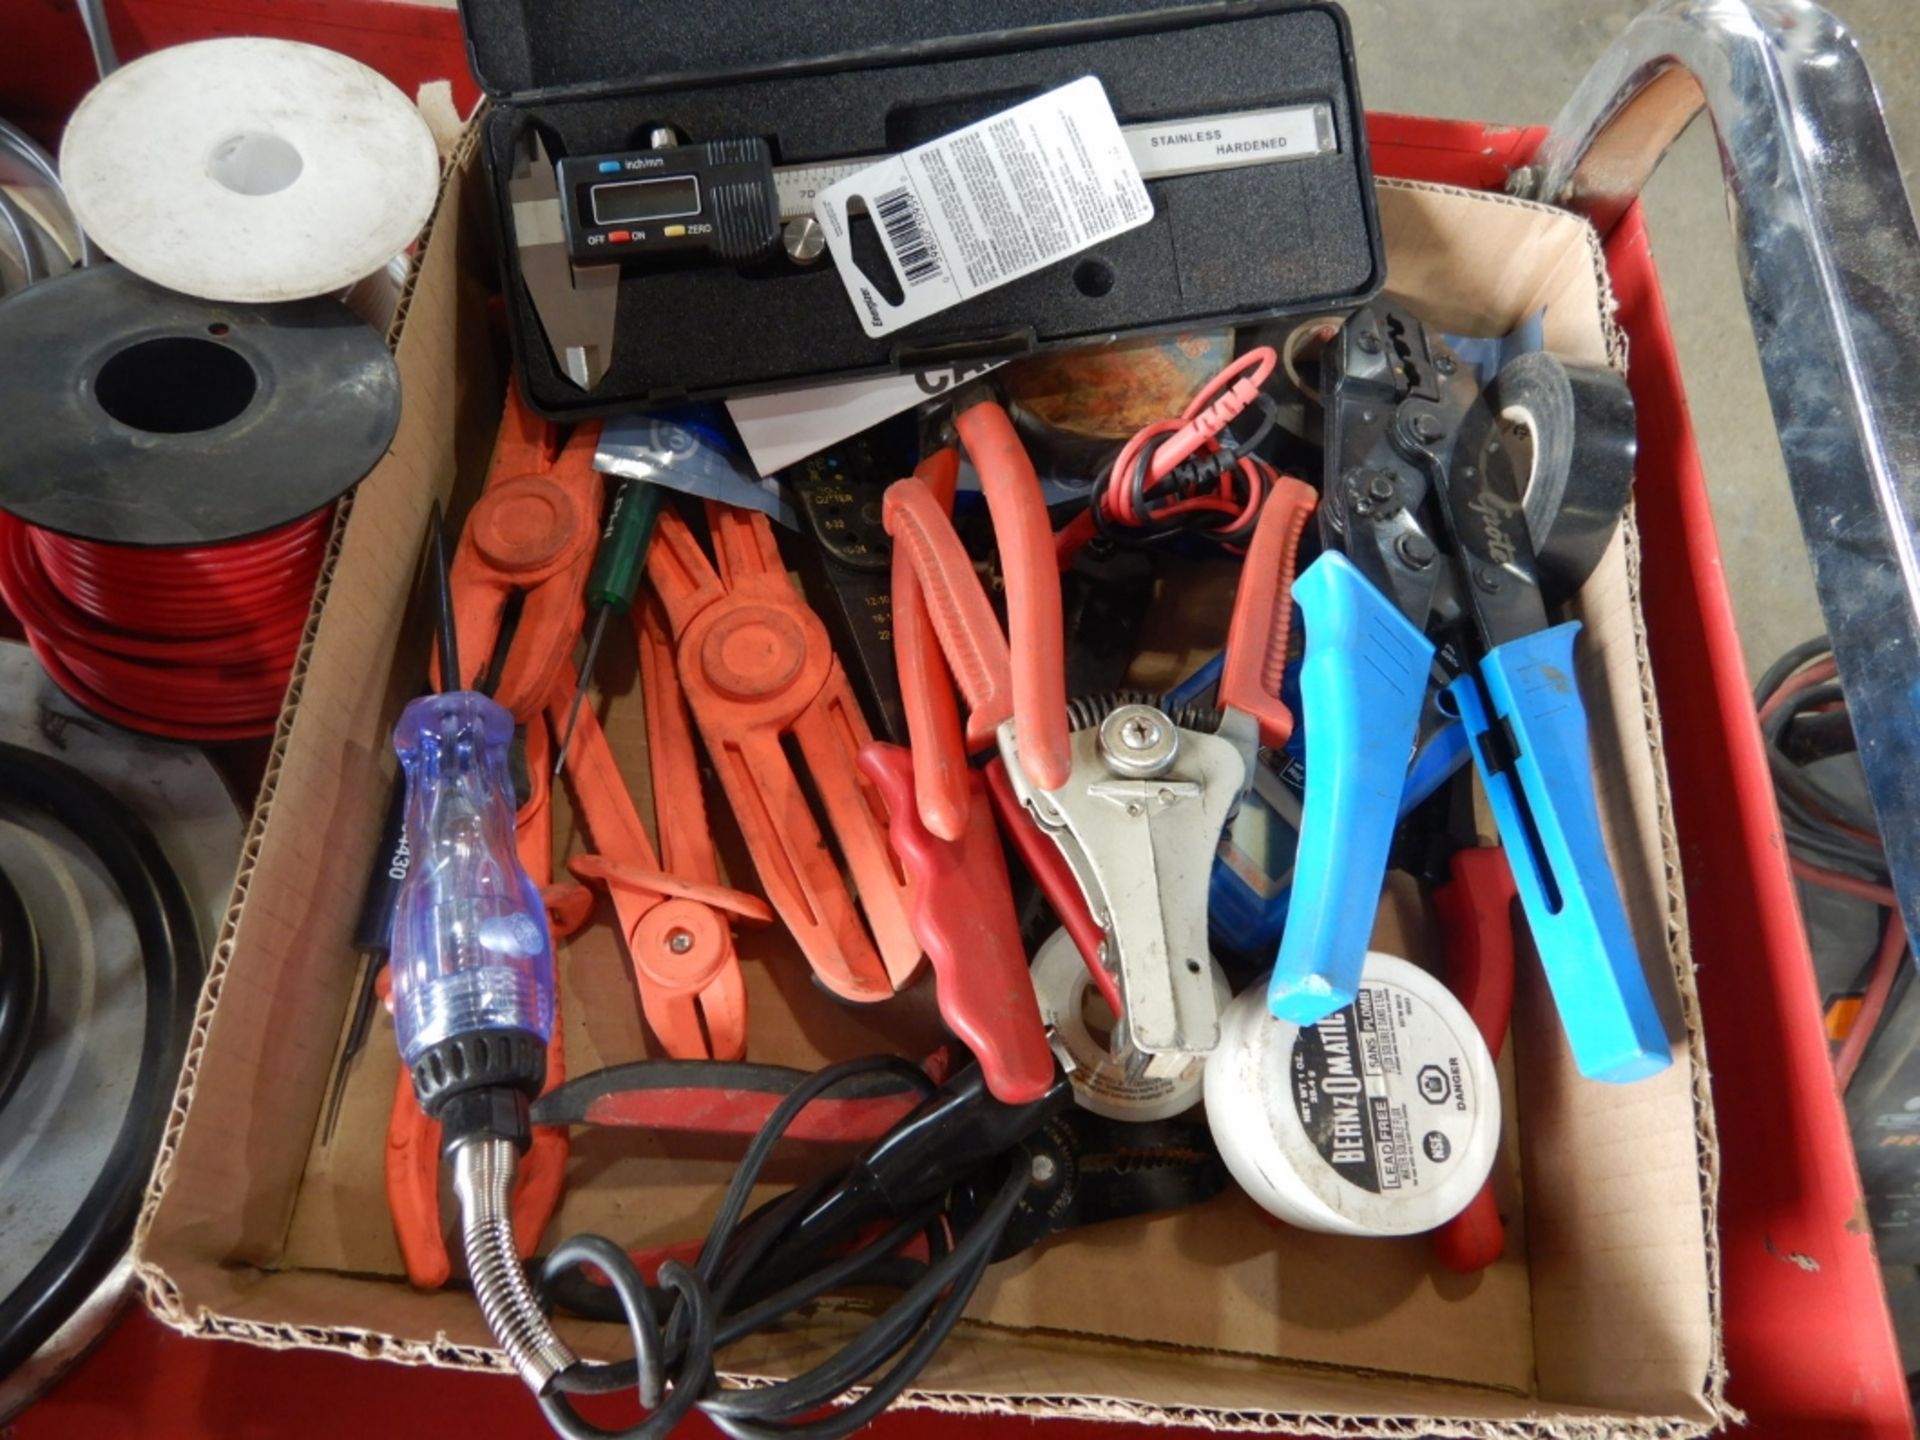 PORTABLE SHOP CART W/WIRING SUPPLIES, TOOLS & ASSORTED RELATED ITEMS - Image 3 of 5